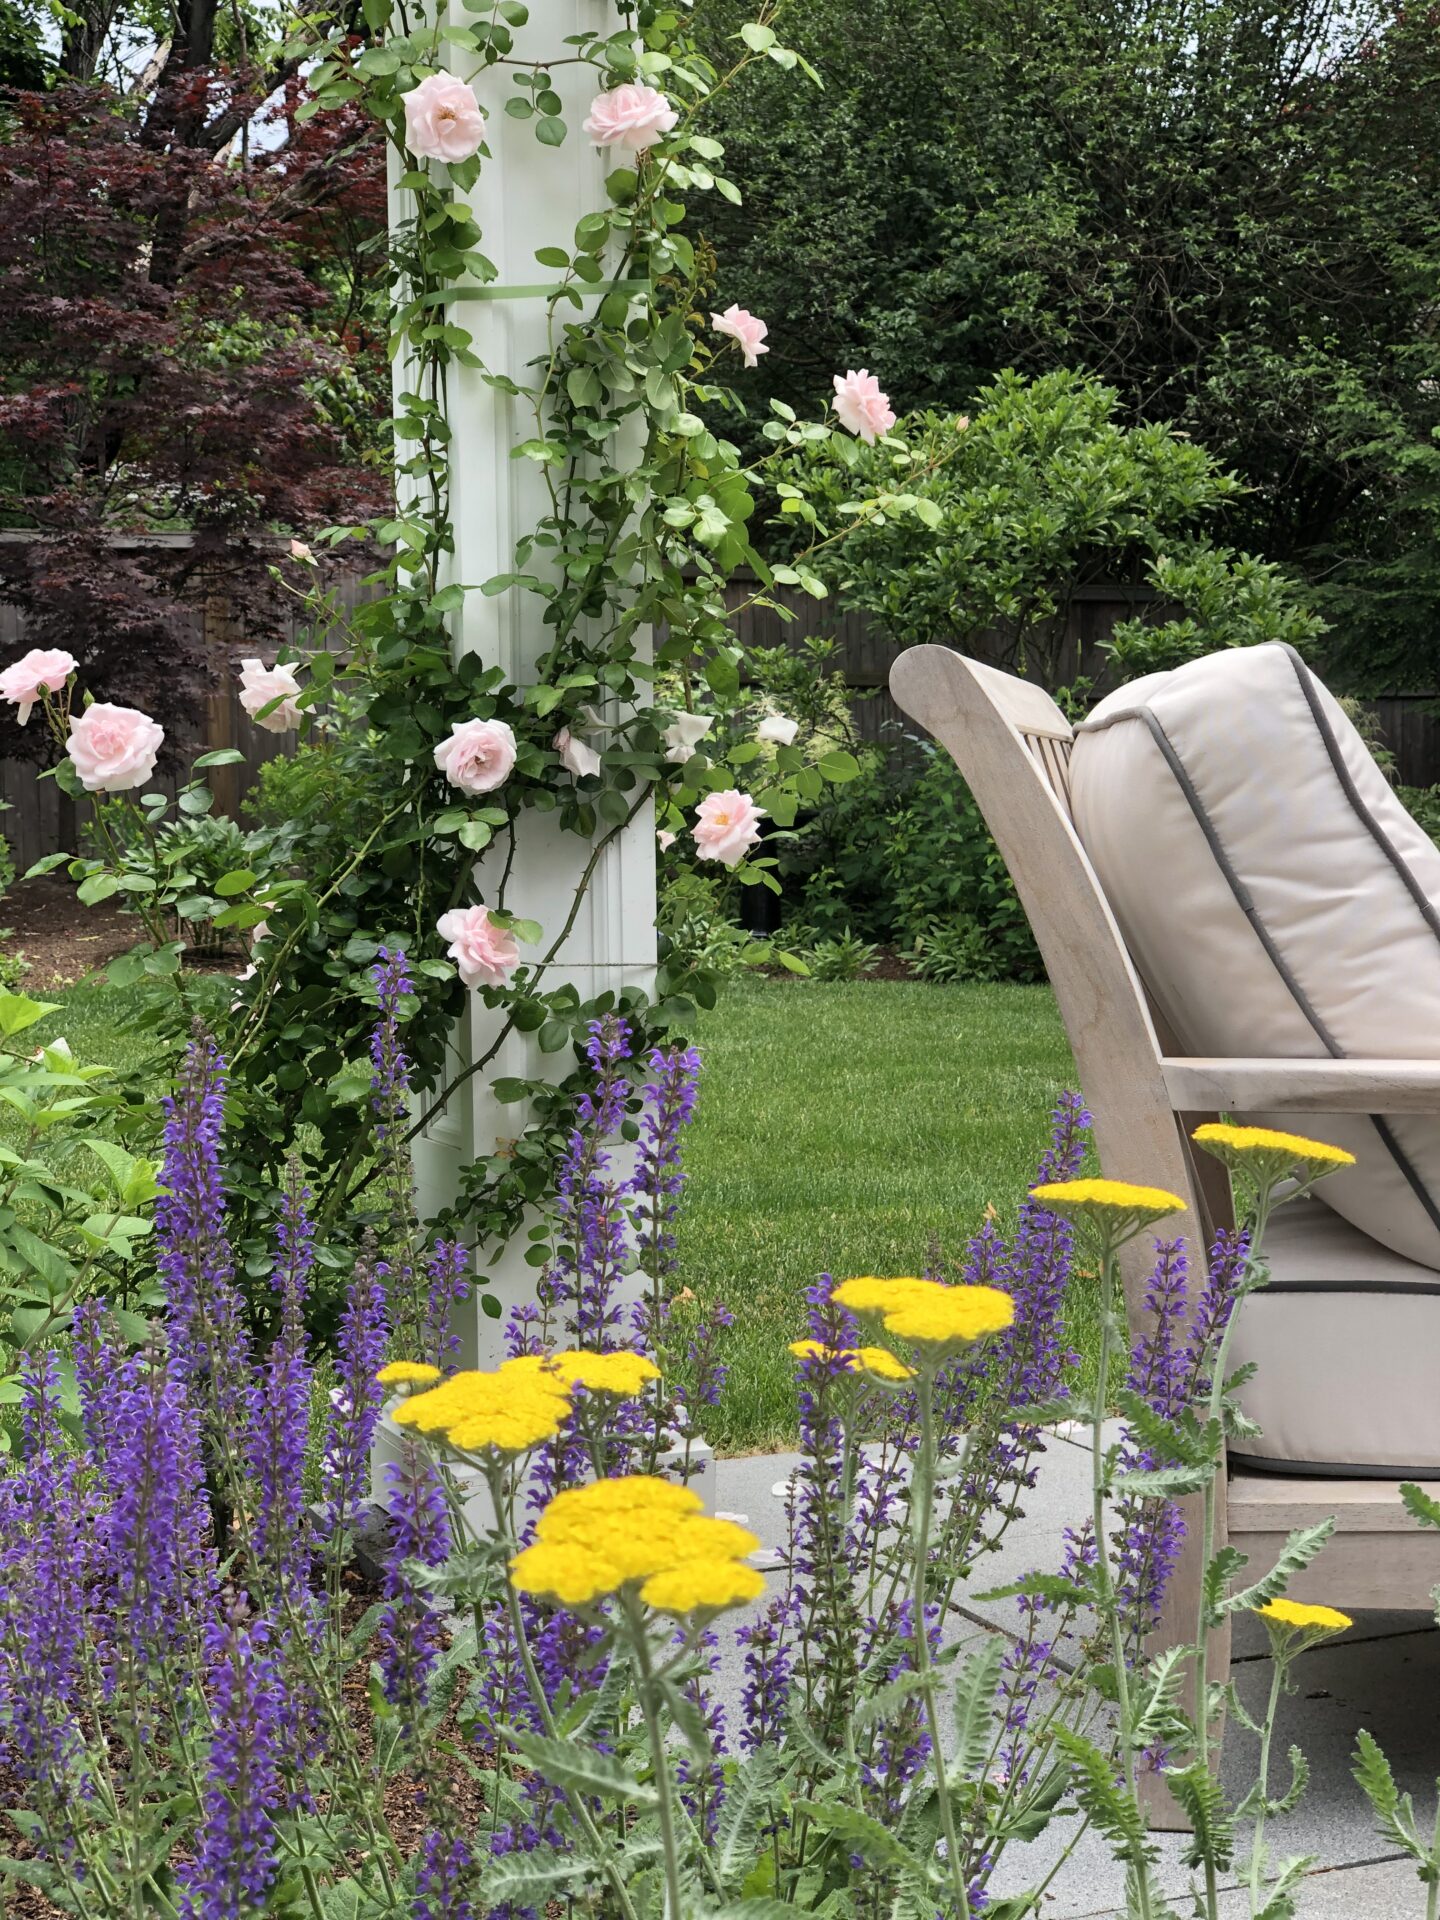 A serene garden with pink roses climbing a pillar, surrounded by purple and yellow flowers, next to a comfortable outdoor chair, suggesting relaxation.